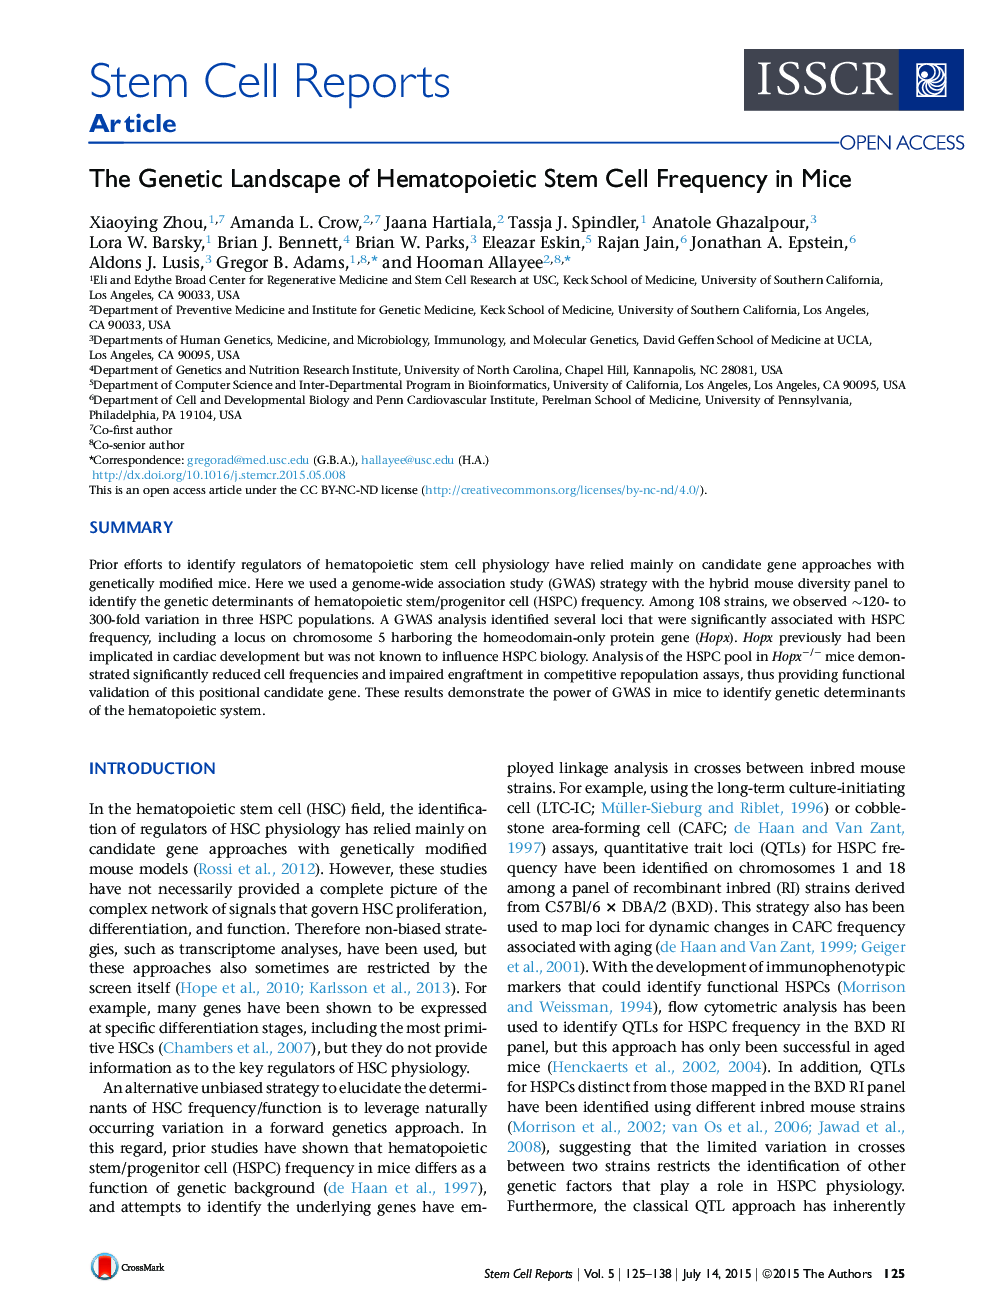 The Genetic Landscape of Hematopoietic Stem Cell Frequency in Mice 